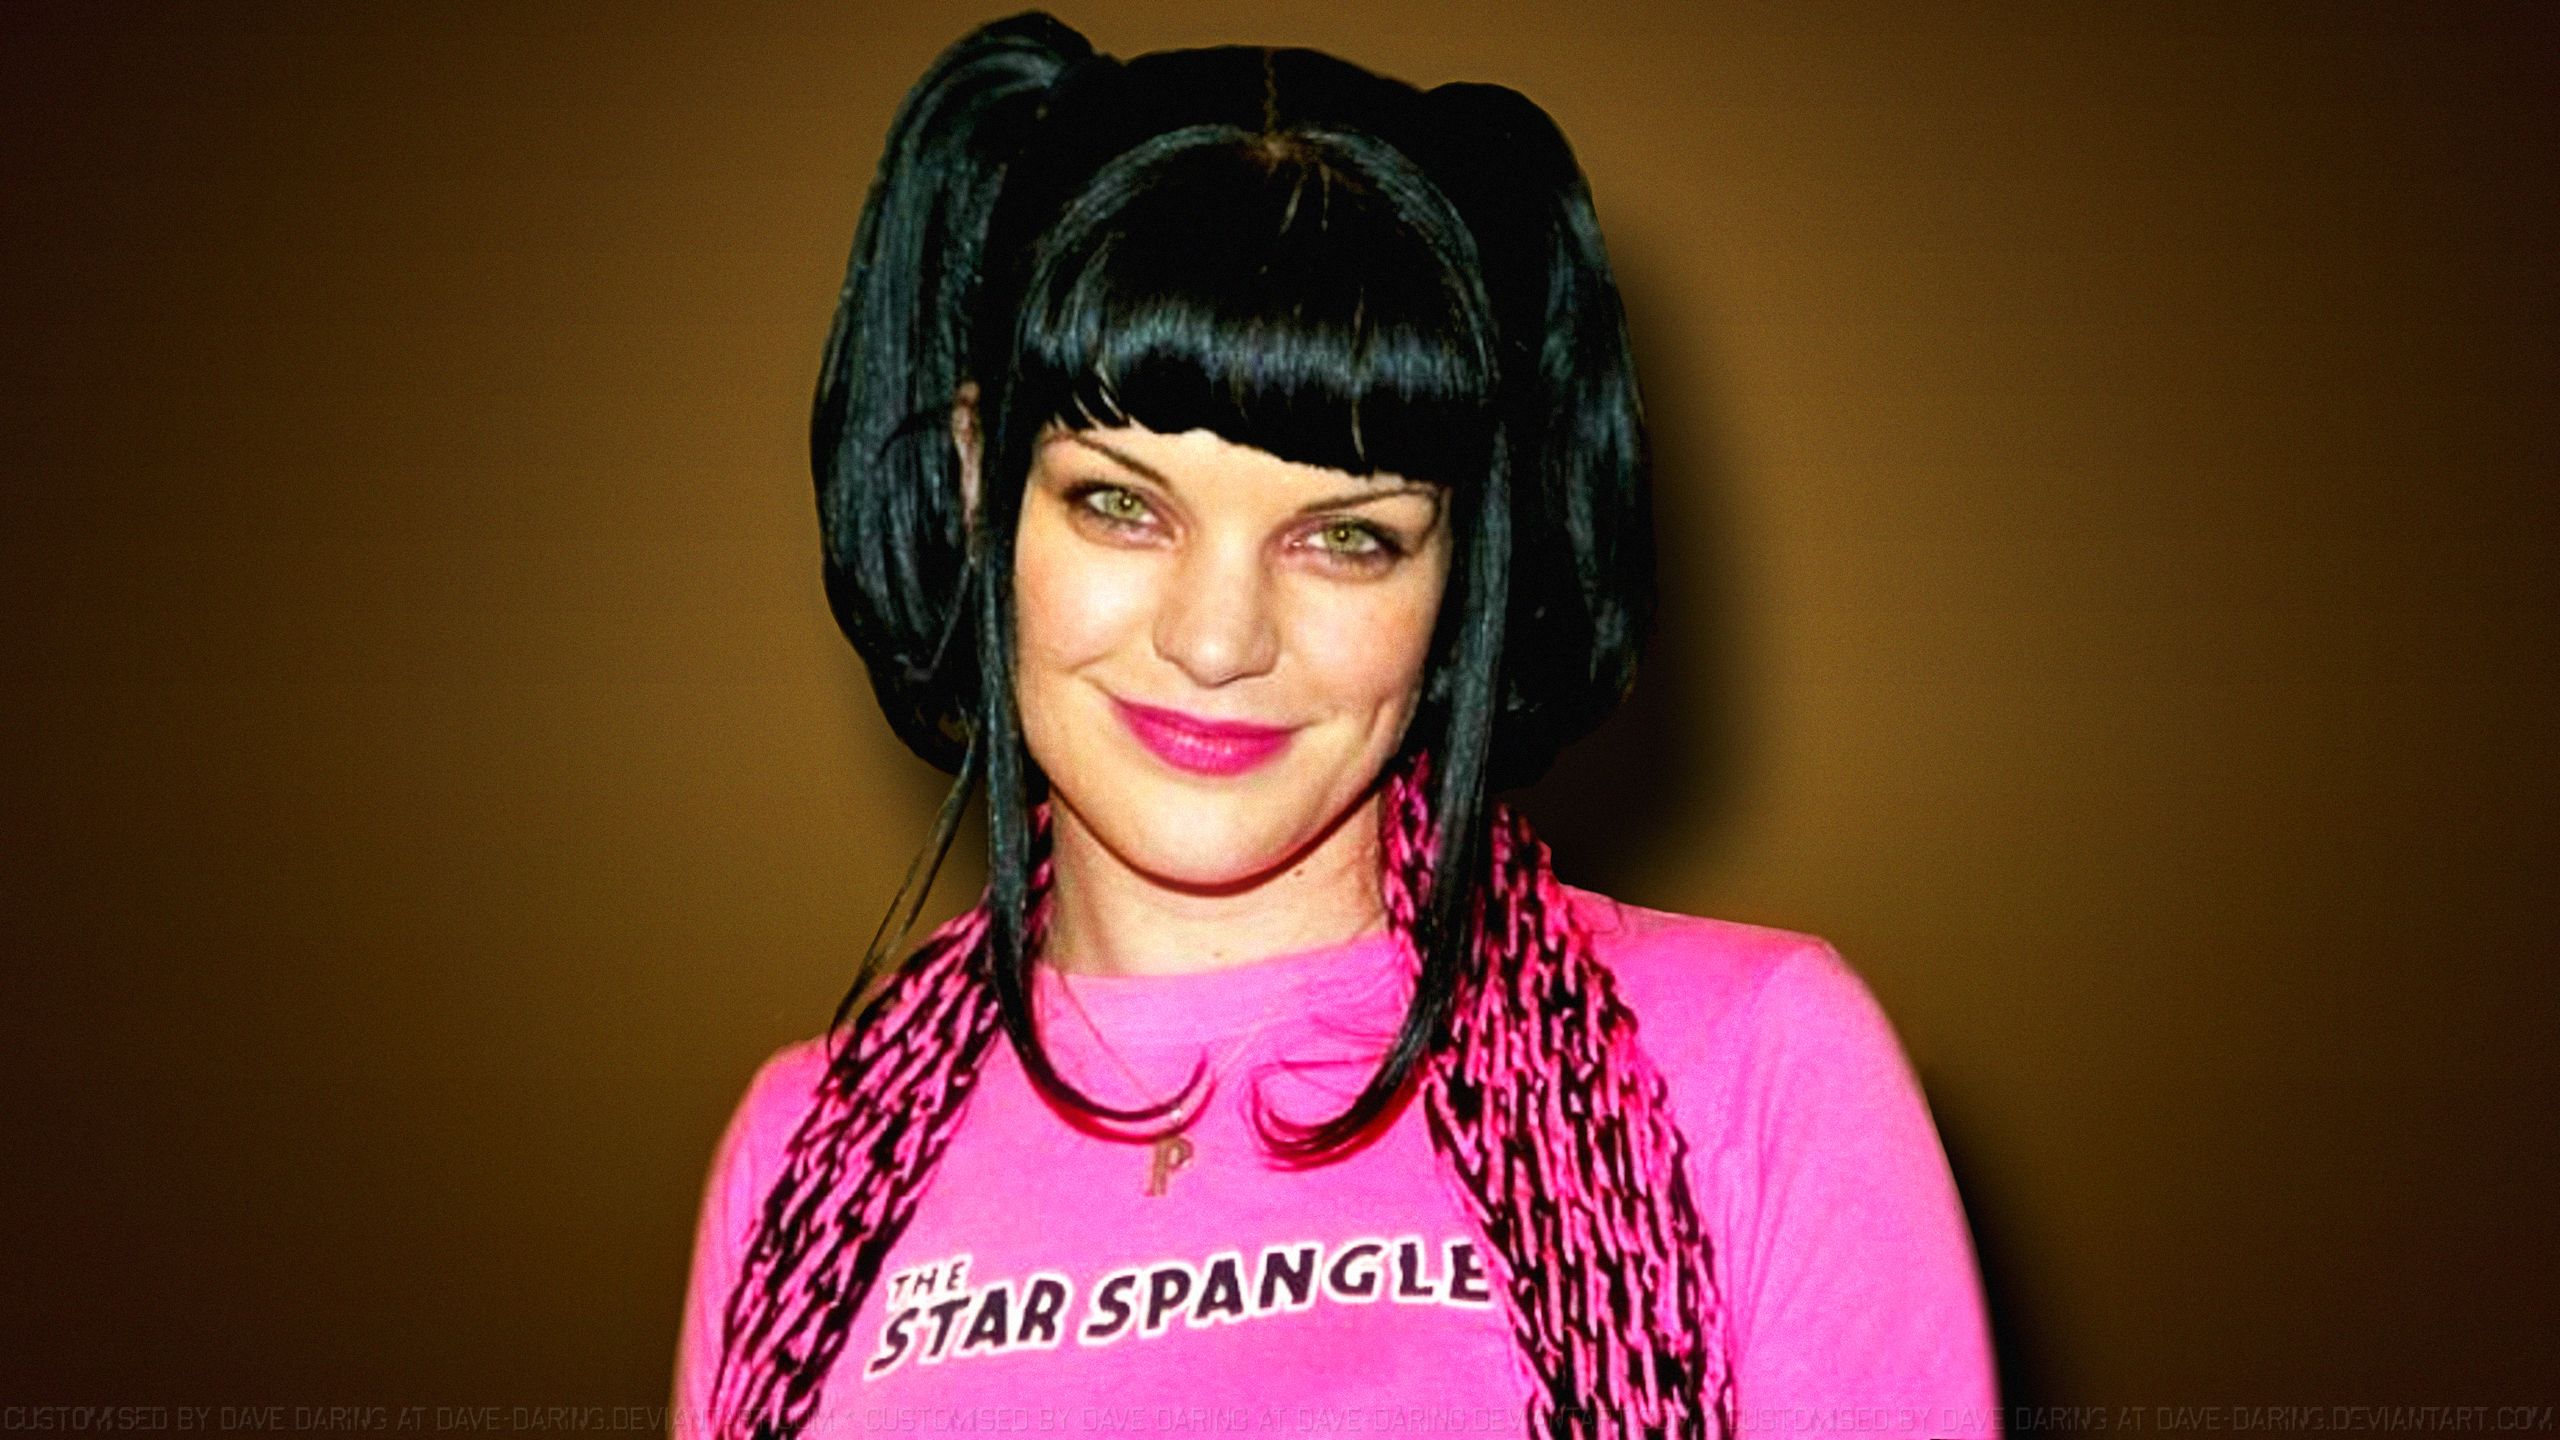 Pauly perrette sexy